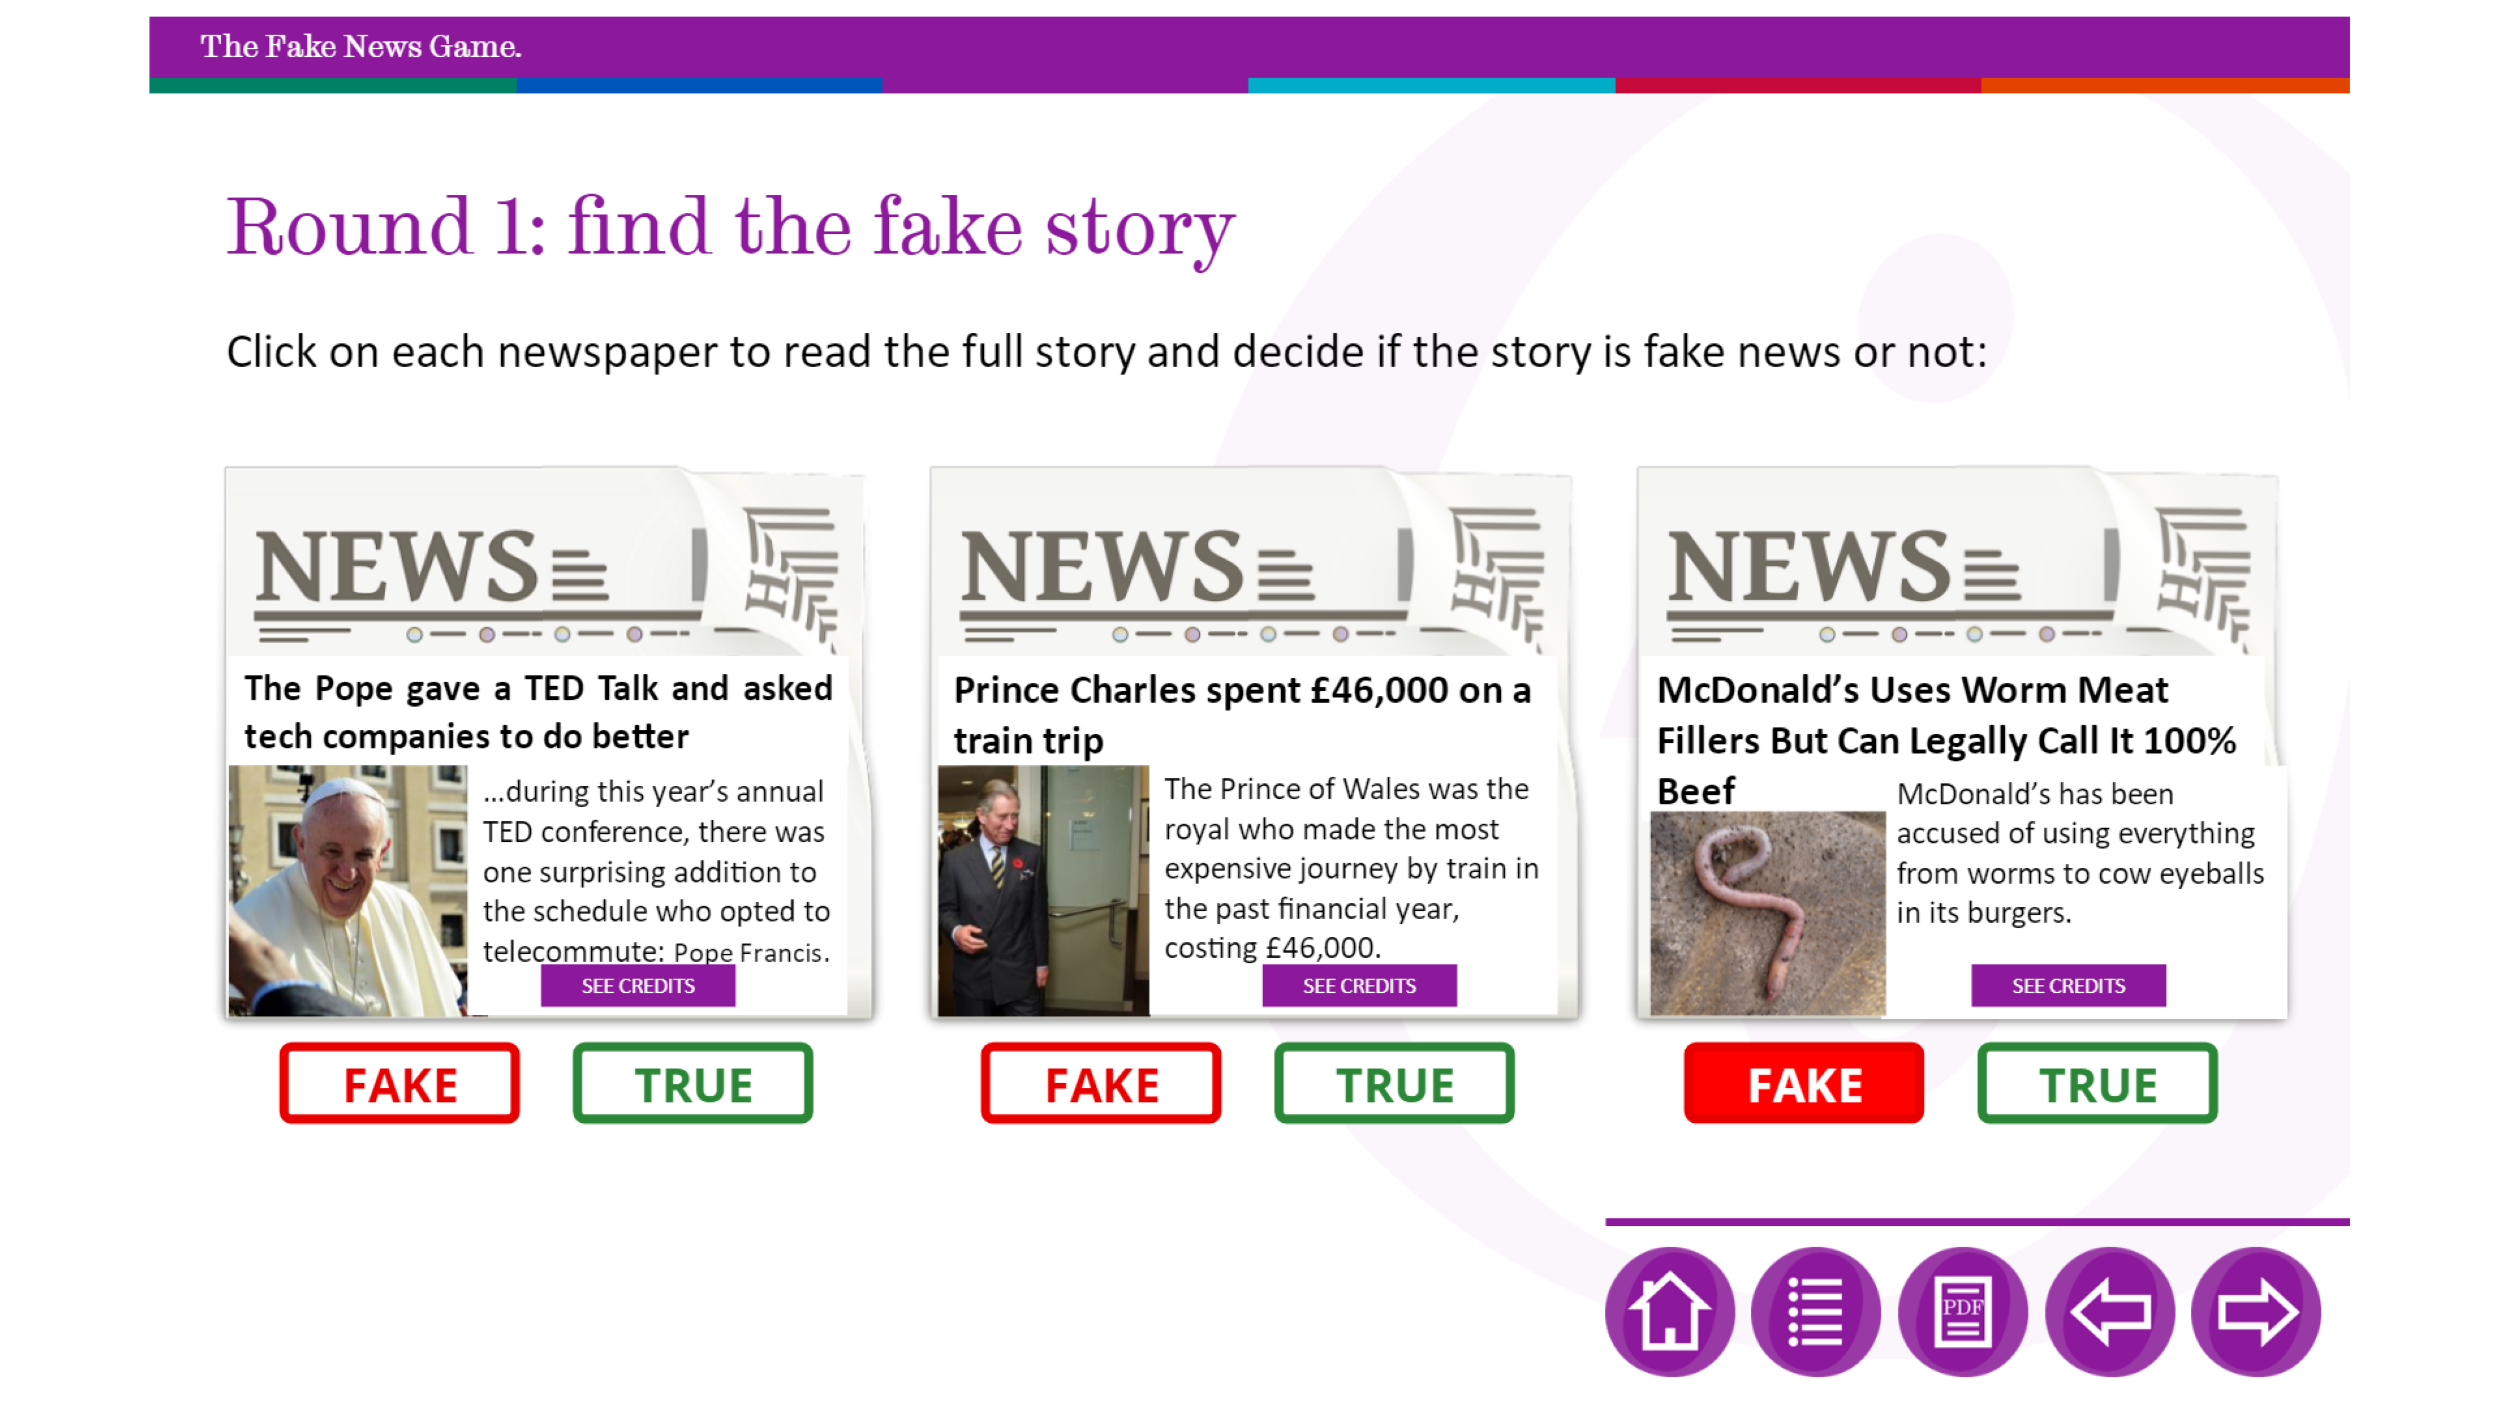 Recognize fake news in real news articles 